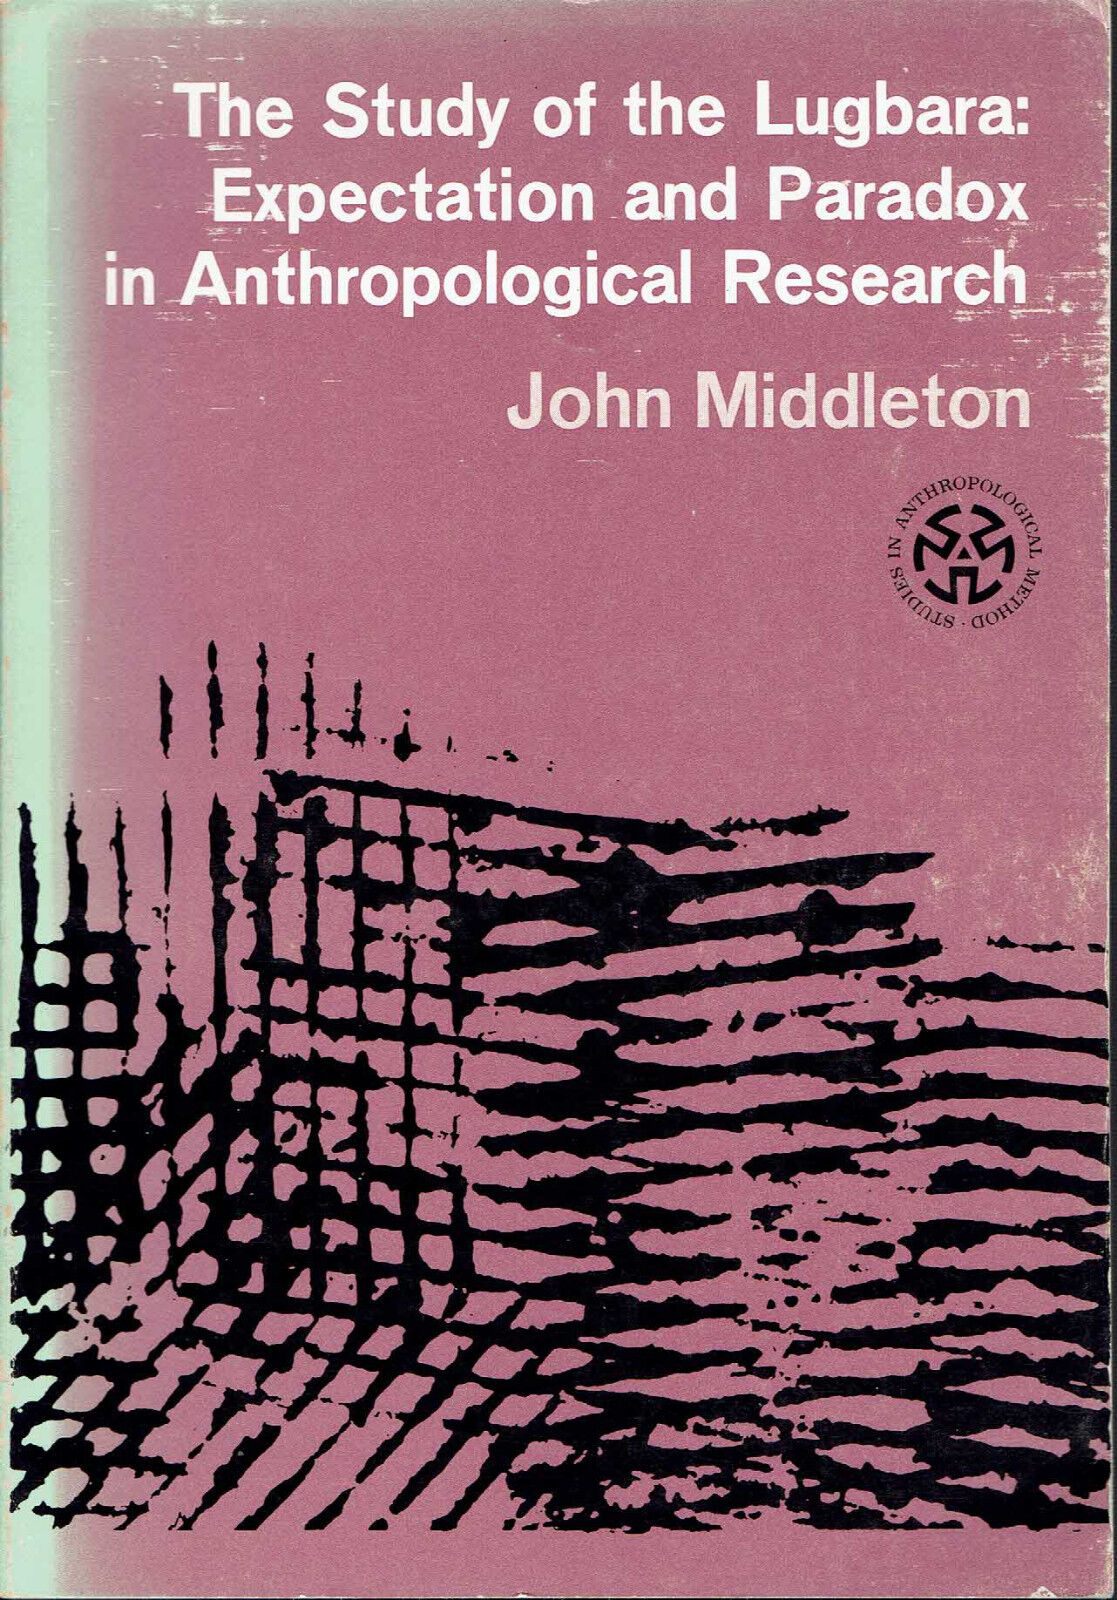 The Study of the Lugbara: Expectation and Paradox in Anthropological Research - Middleton, John